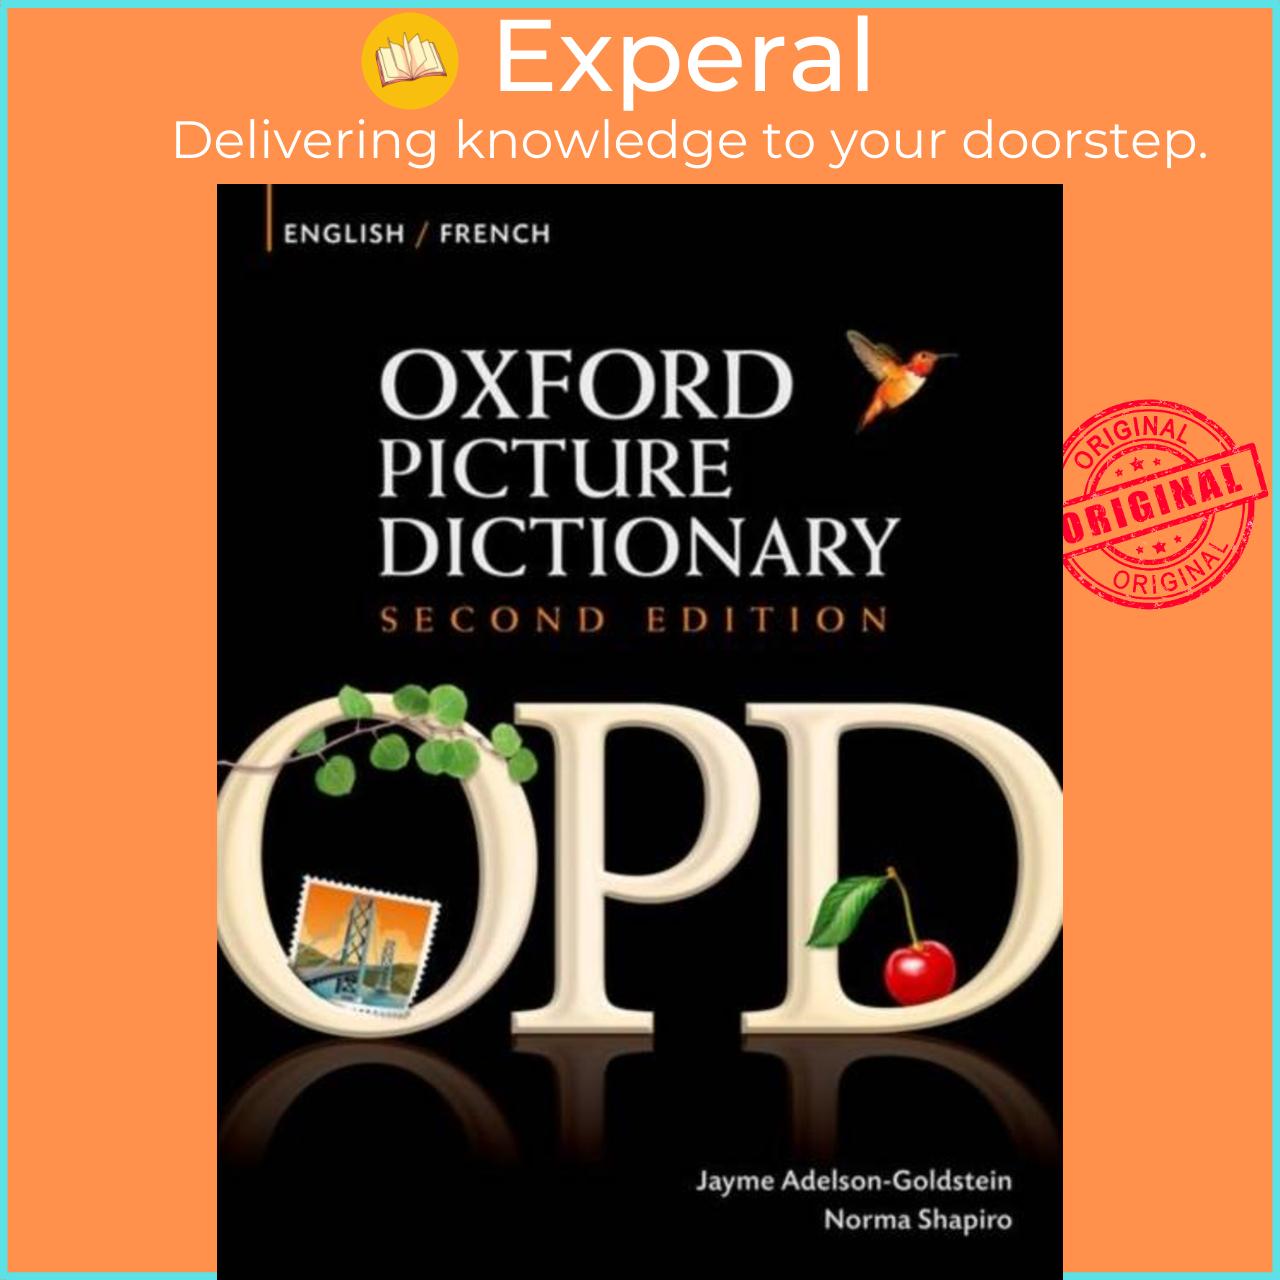 Sách - Oxford Picture Dictionary Second Edition: English-French Edition - Bilin by Norma Shapiro (UK edition, paperback)